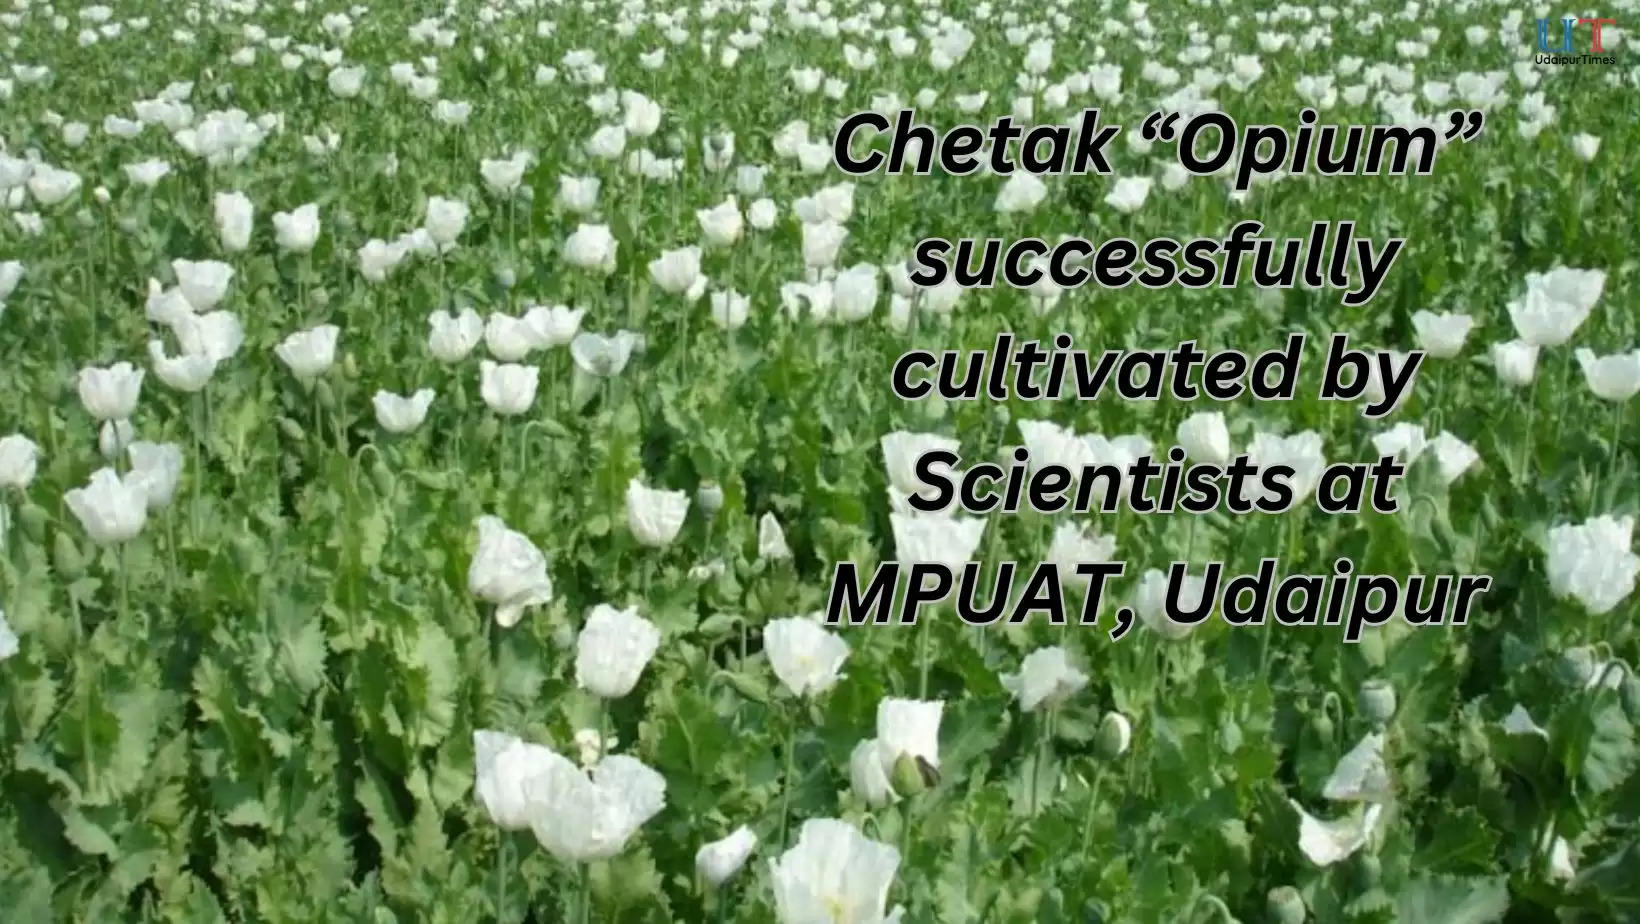 Chetak Opium cultivated successfully at MPUAT, Udaipur